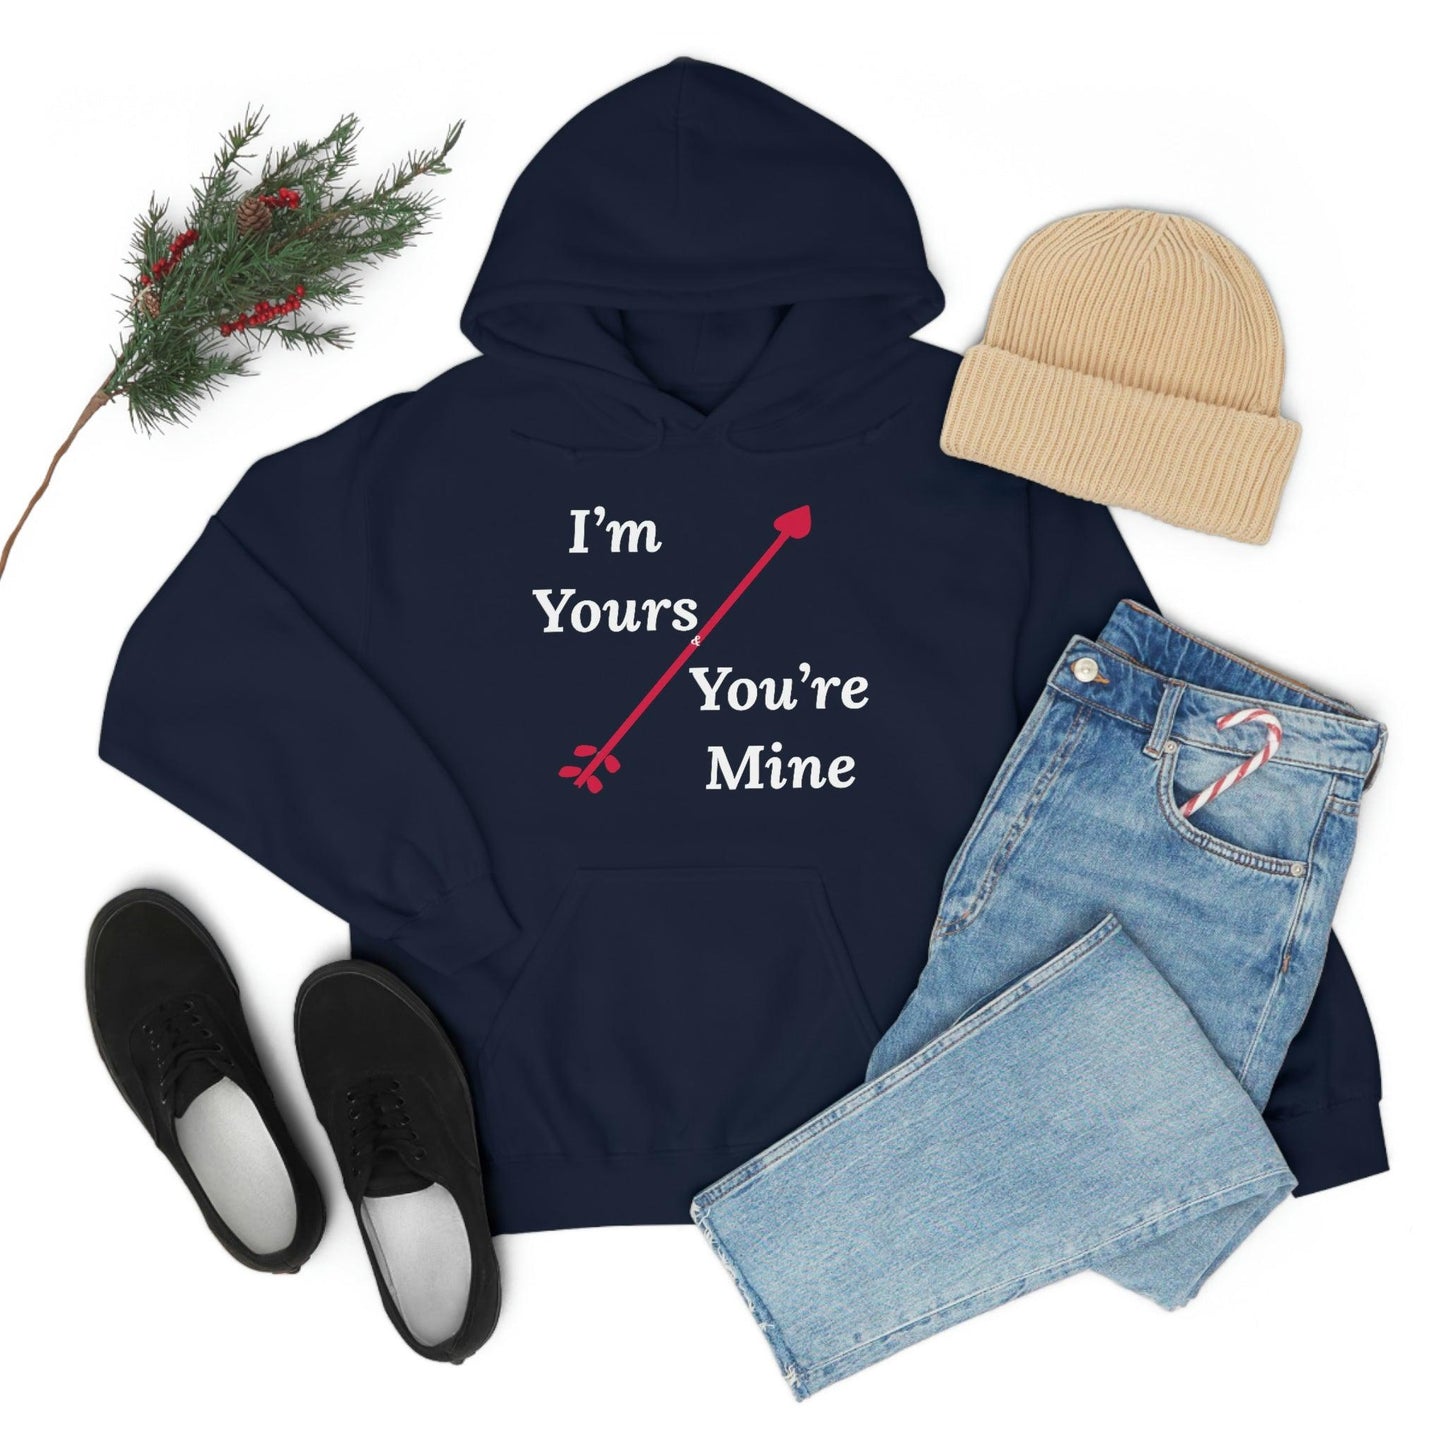 I'm Yours and You're Mine Hooded Sweatshirt